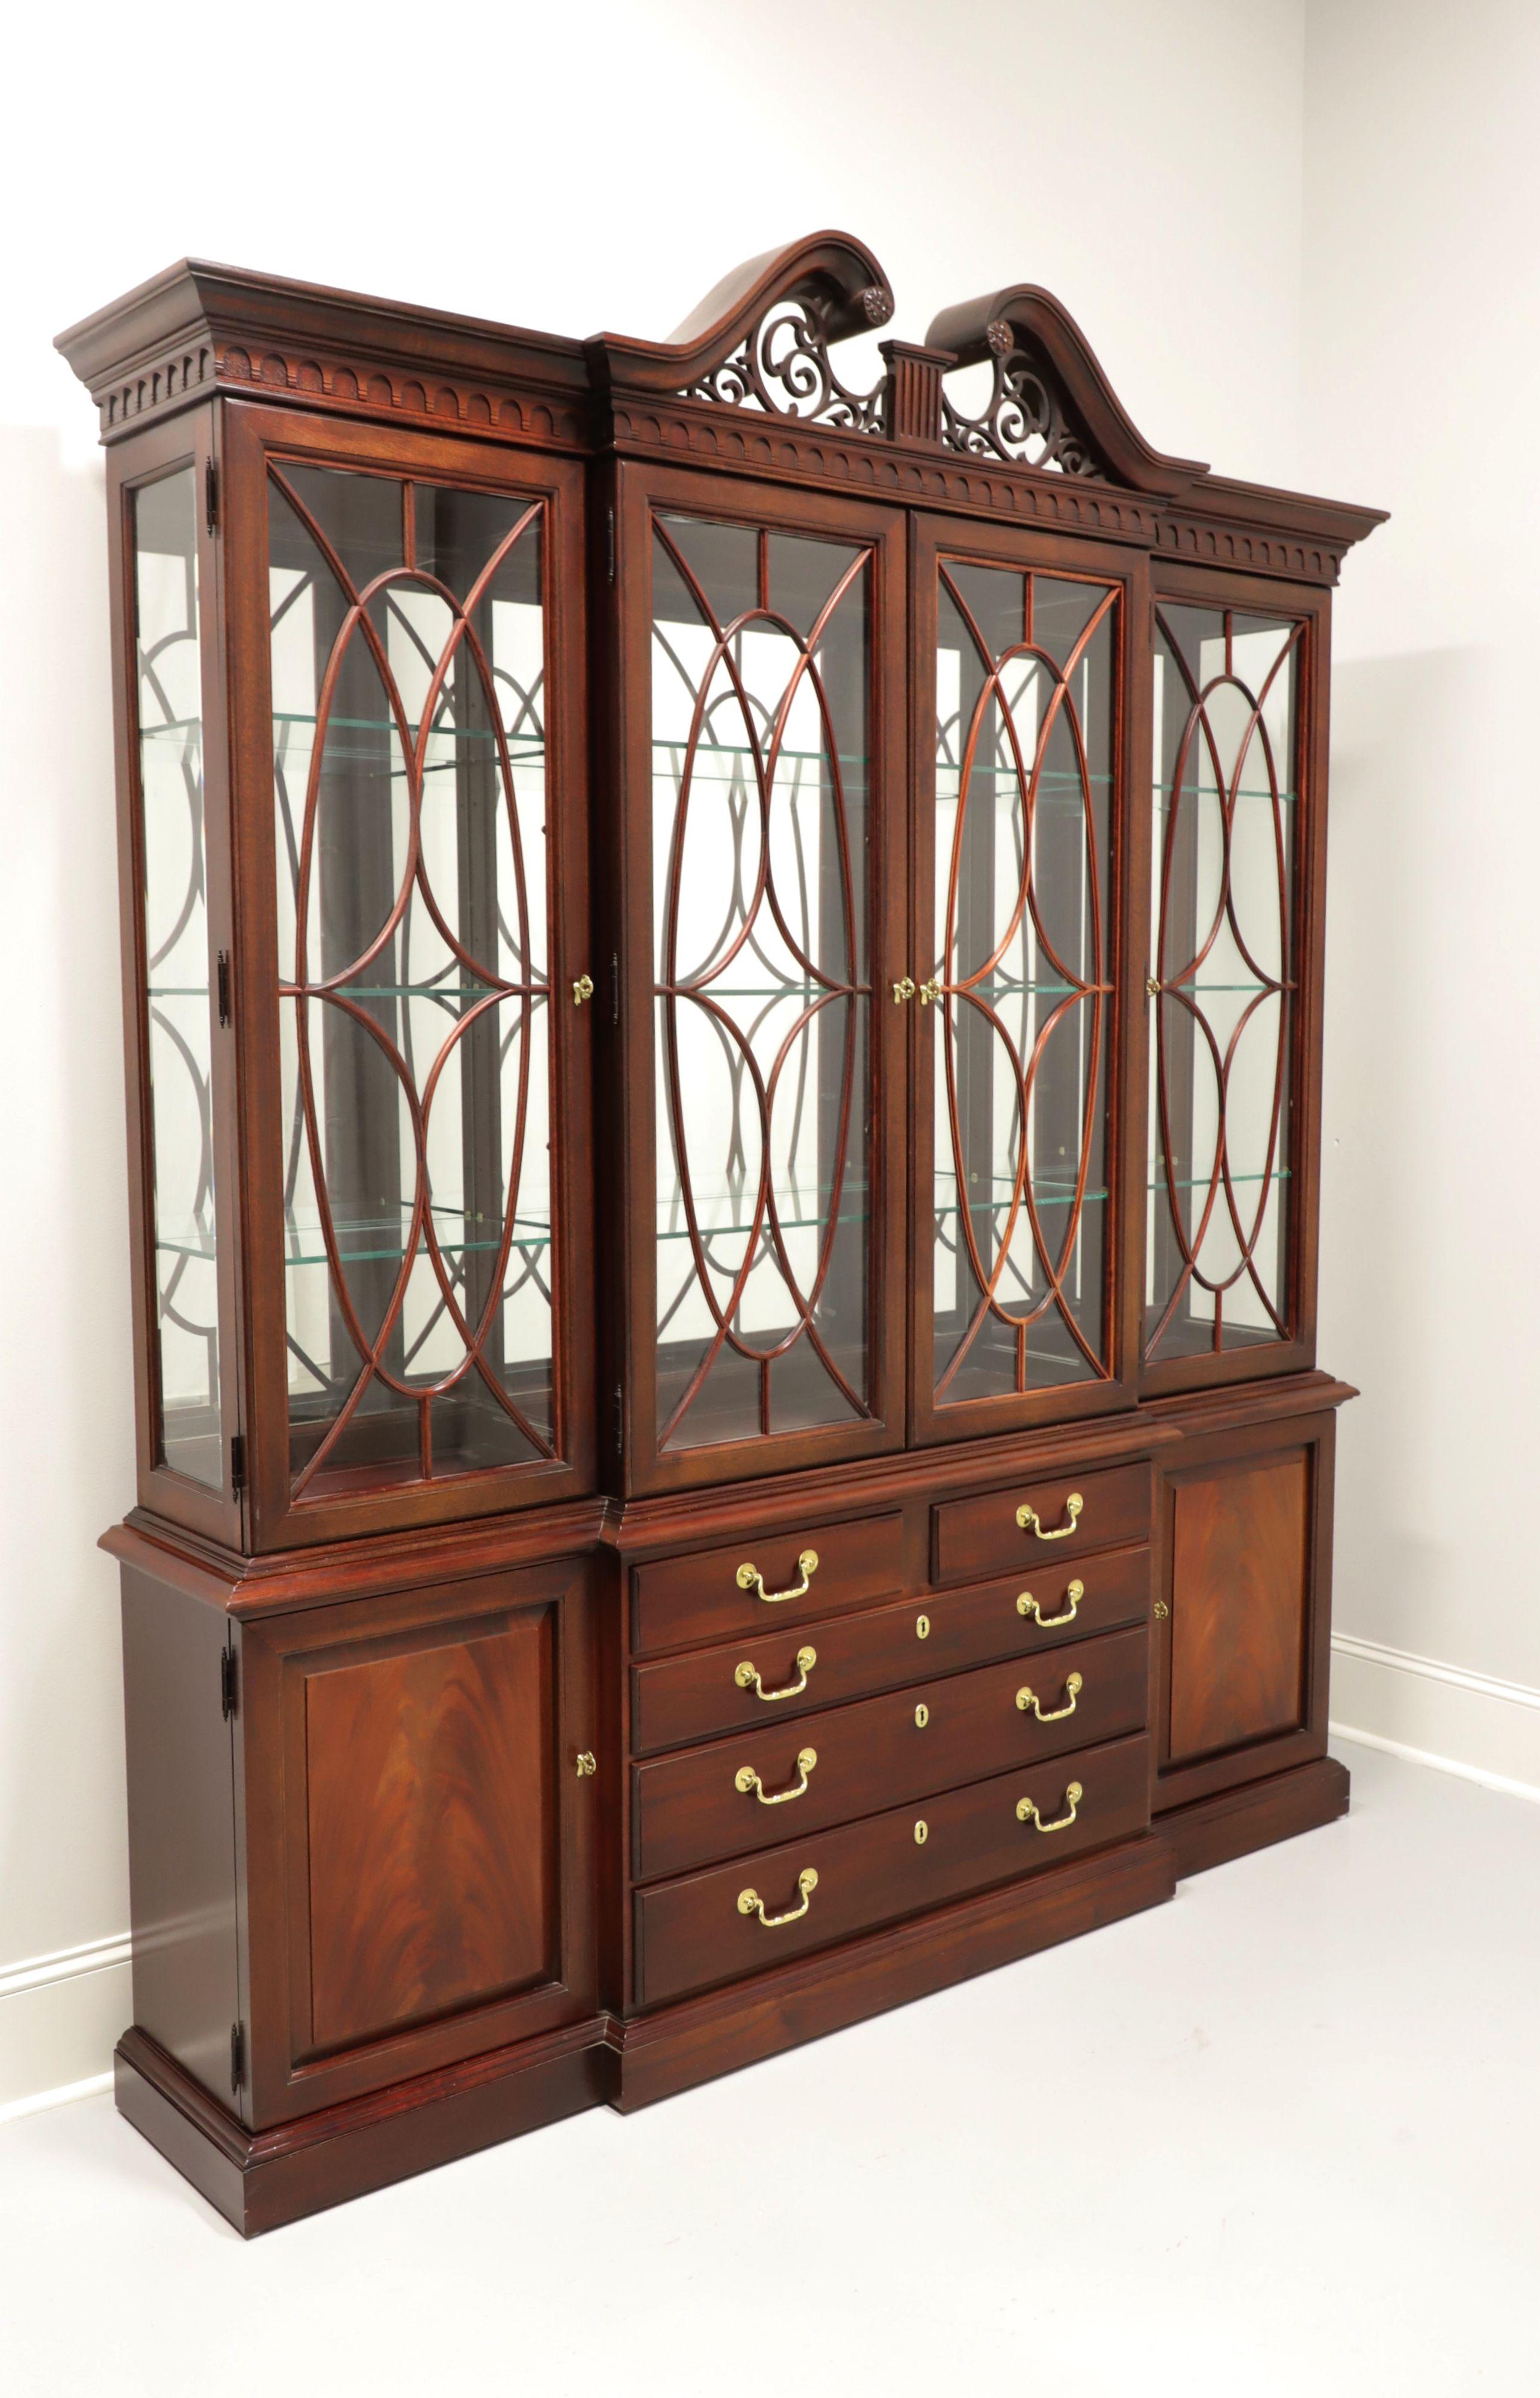 A Chippendale style breakfront china cabinet by Thomasville. Flame mahogany, brass hardware, top finished with crown & dentil molding and a center fretwork scroll pediment. Upper cabinet features three lighted compartments with three adjustable